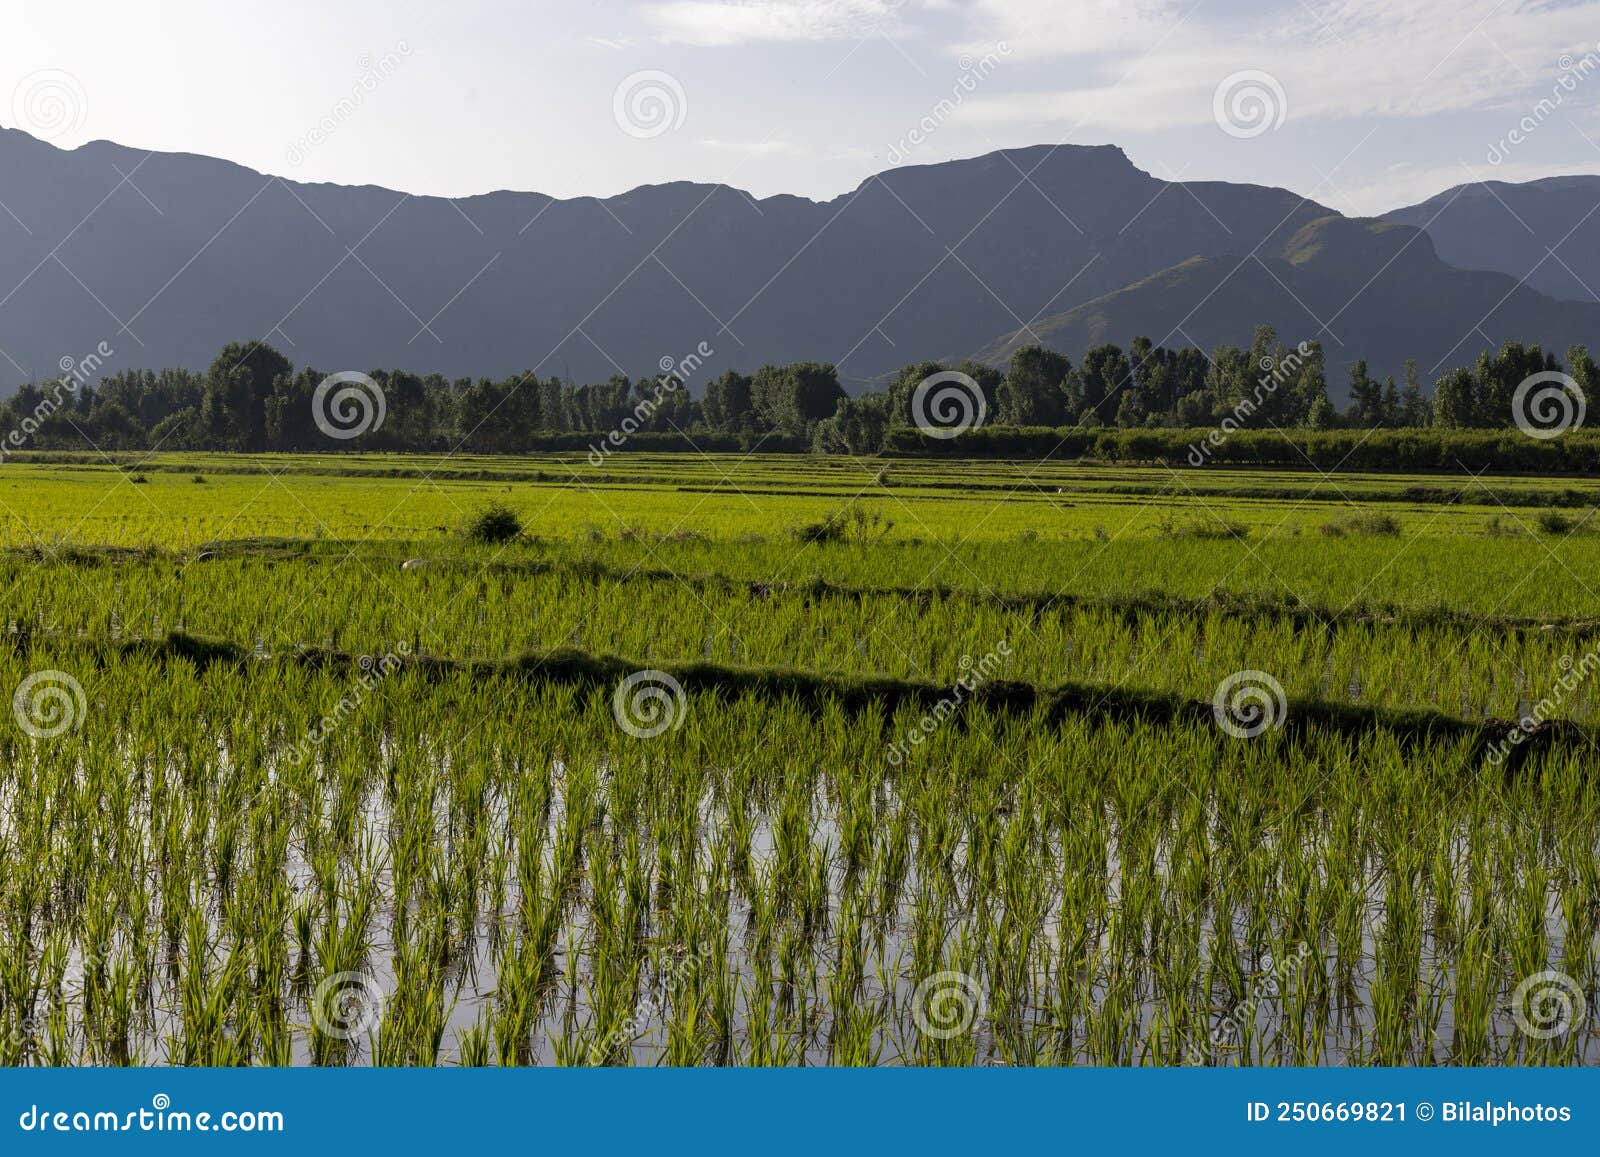 beautiful lush green view of rice fields in the swat valley, khyber pakthunkhwa, pakistan